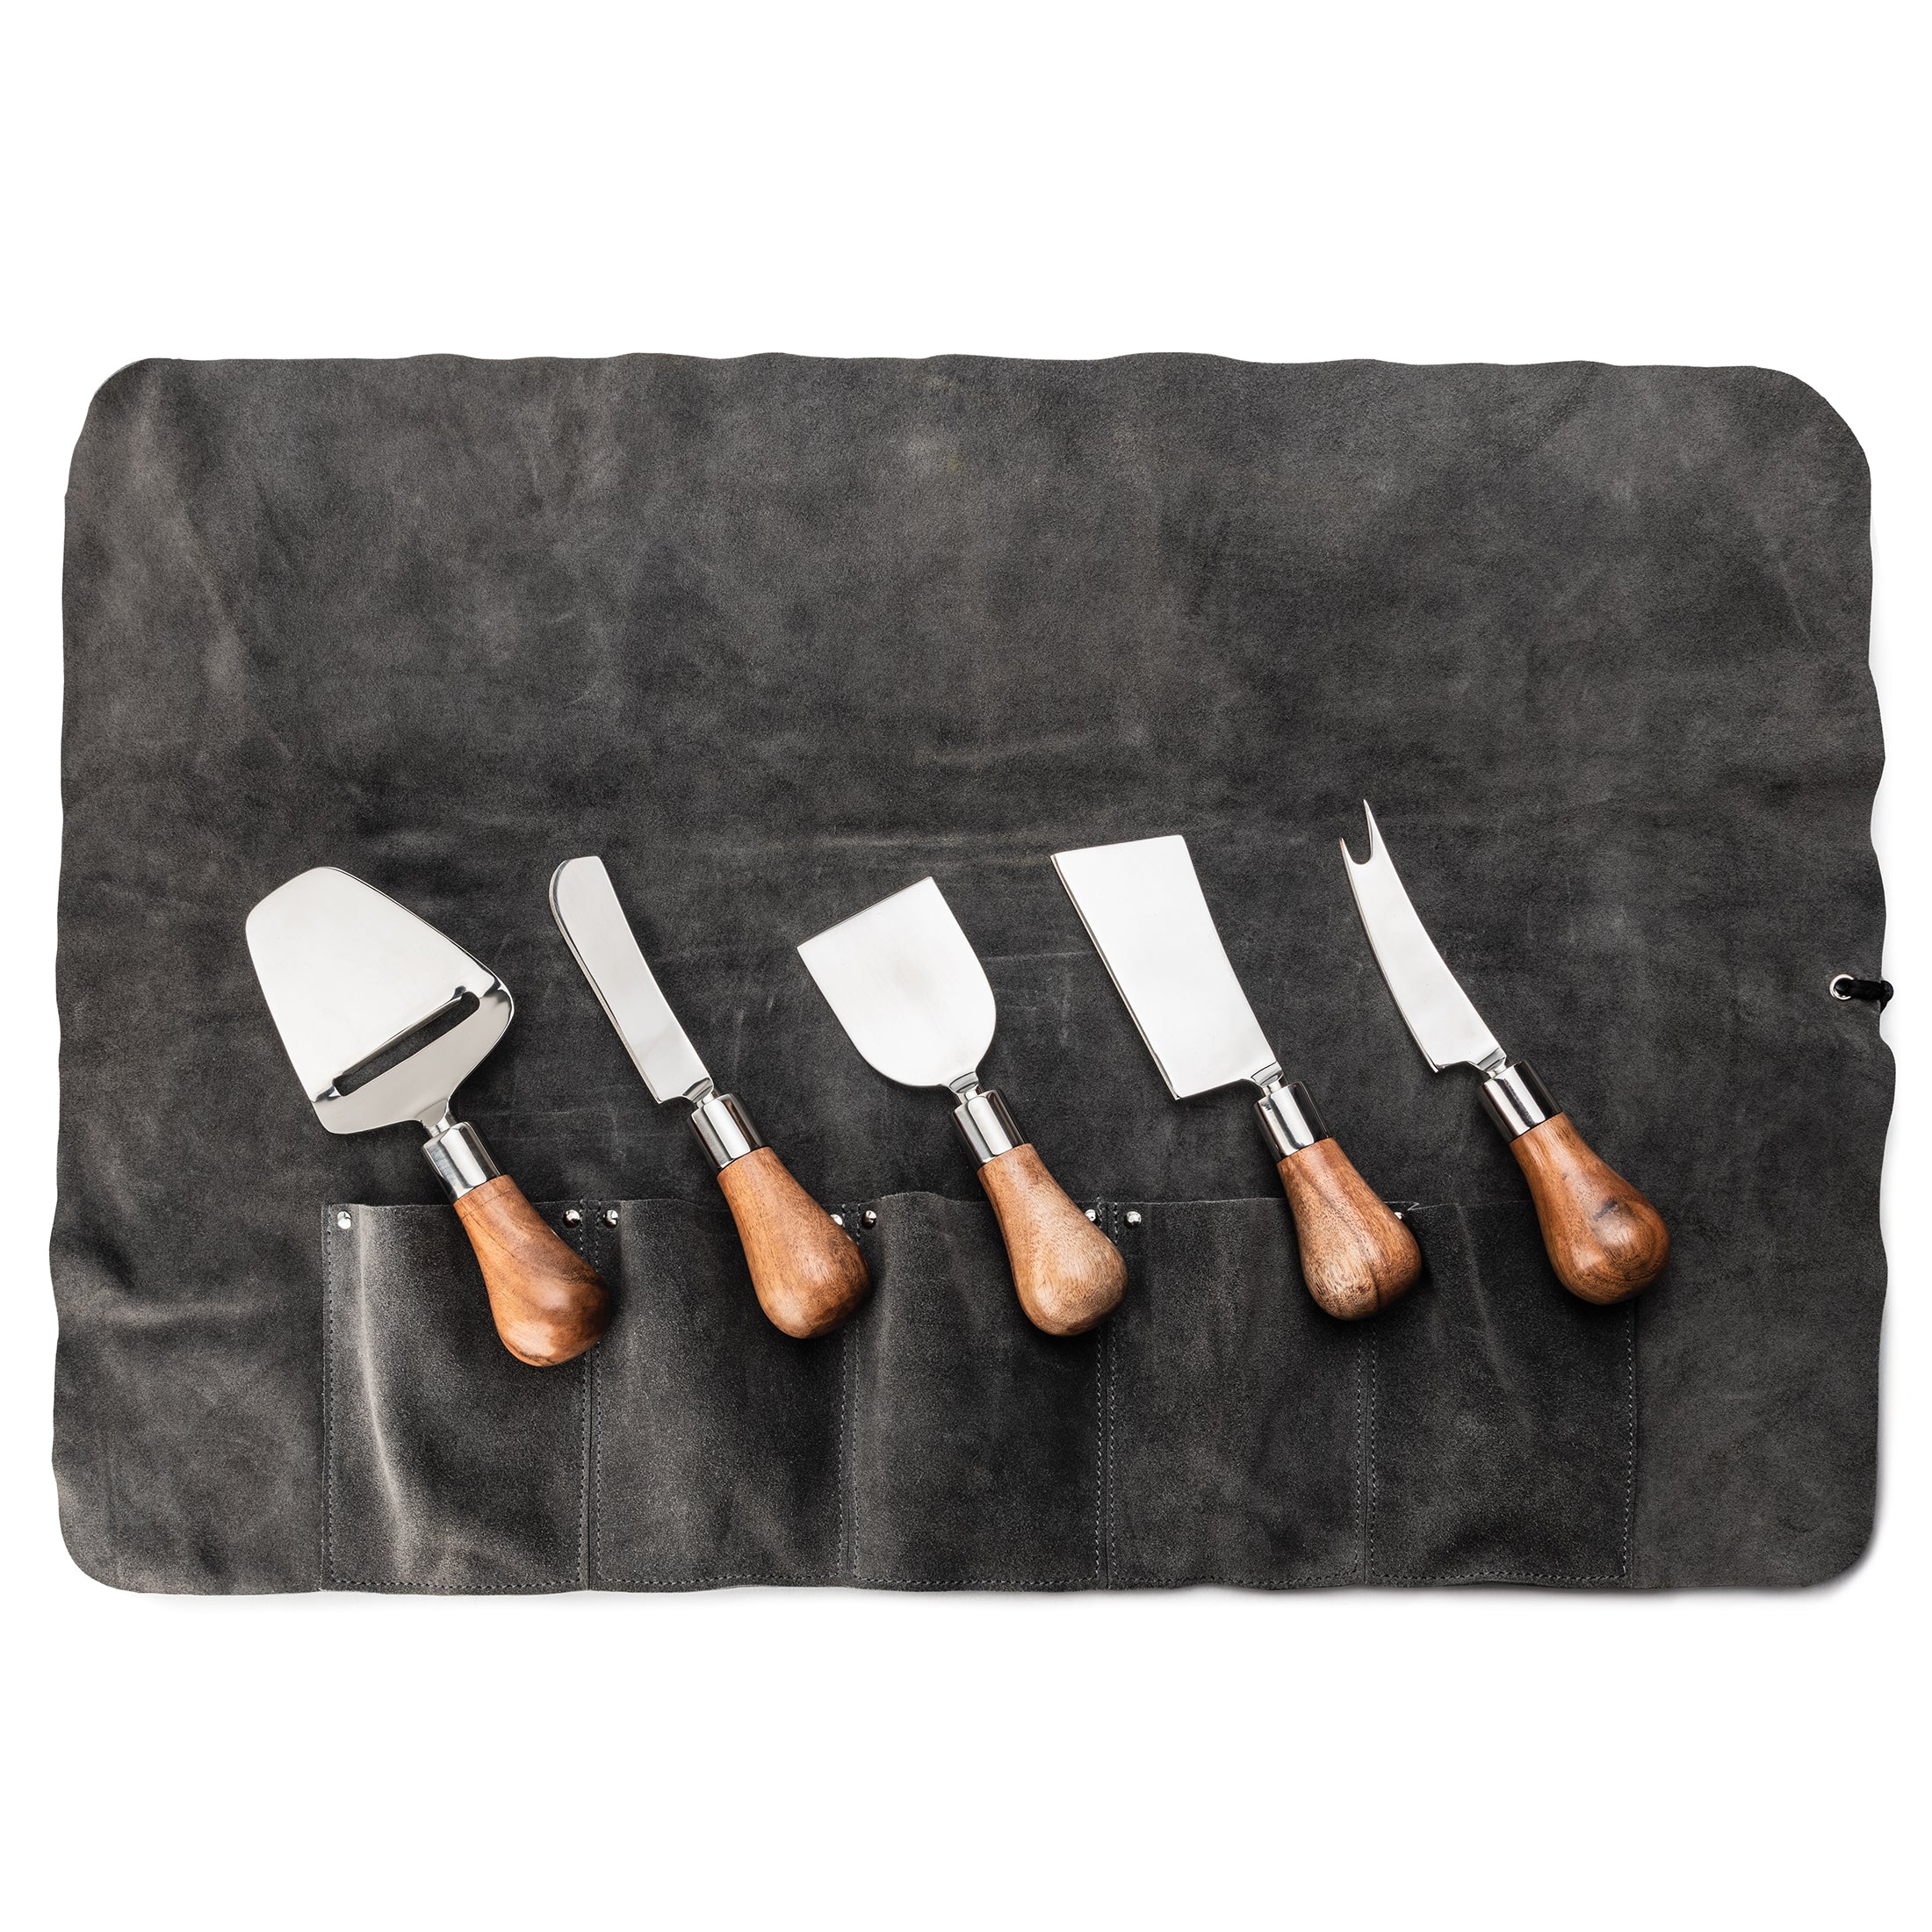 Cheese Knife Set in Gift Box - Set of 5